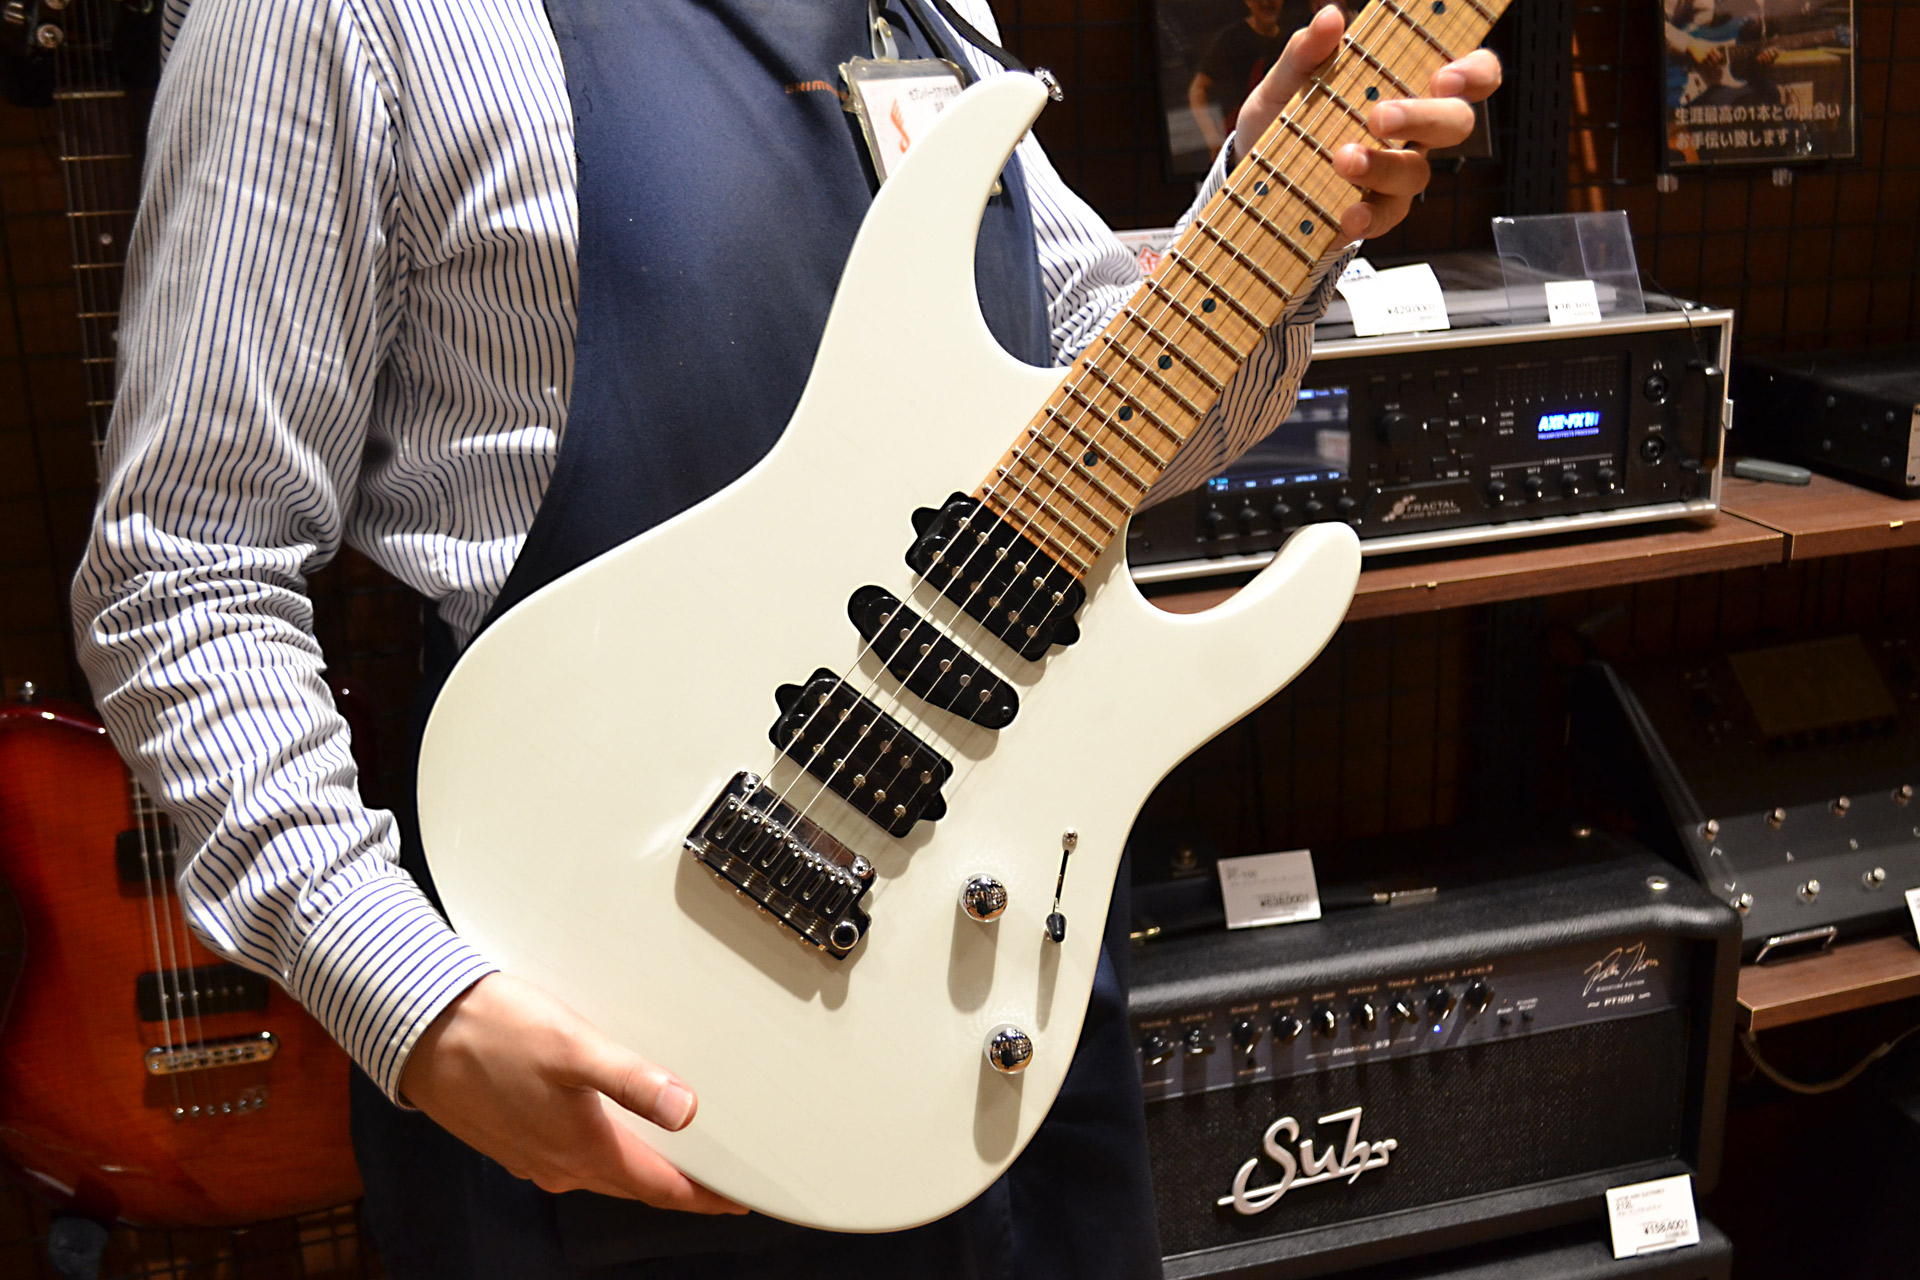 【Suhr】Custom Modern Antique Rosted Alder Body Chambered Nickel frets (Olympic White)を紹介！